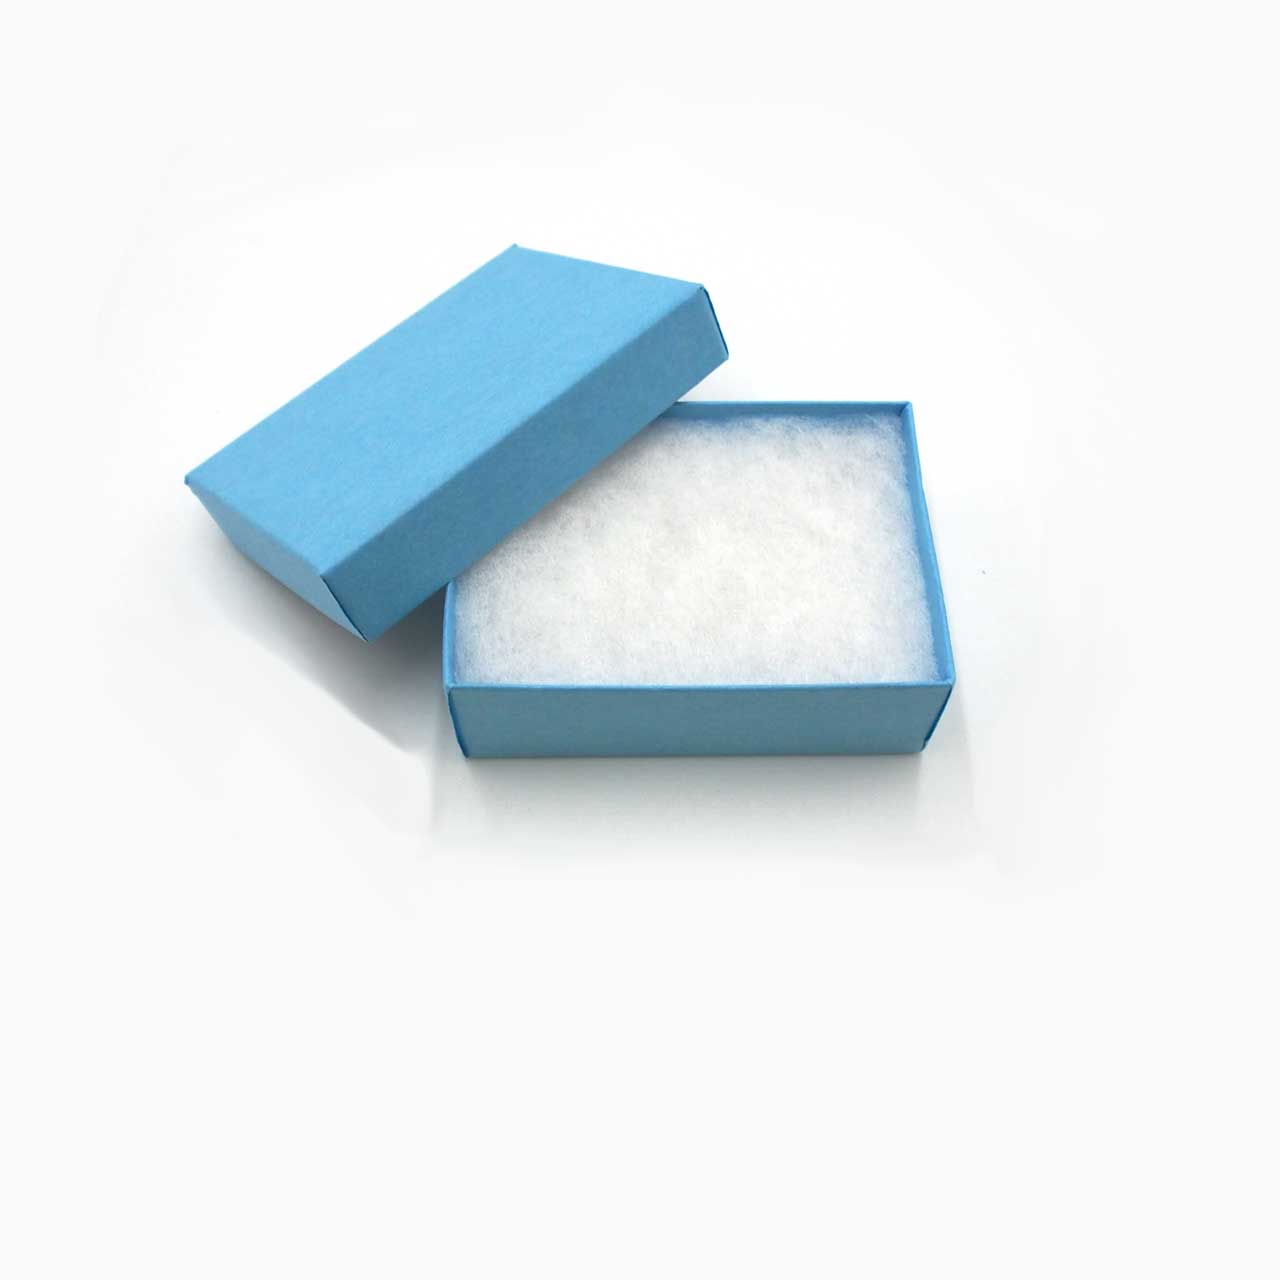 Light Blue Cotton Filled Box open to show cotton filling